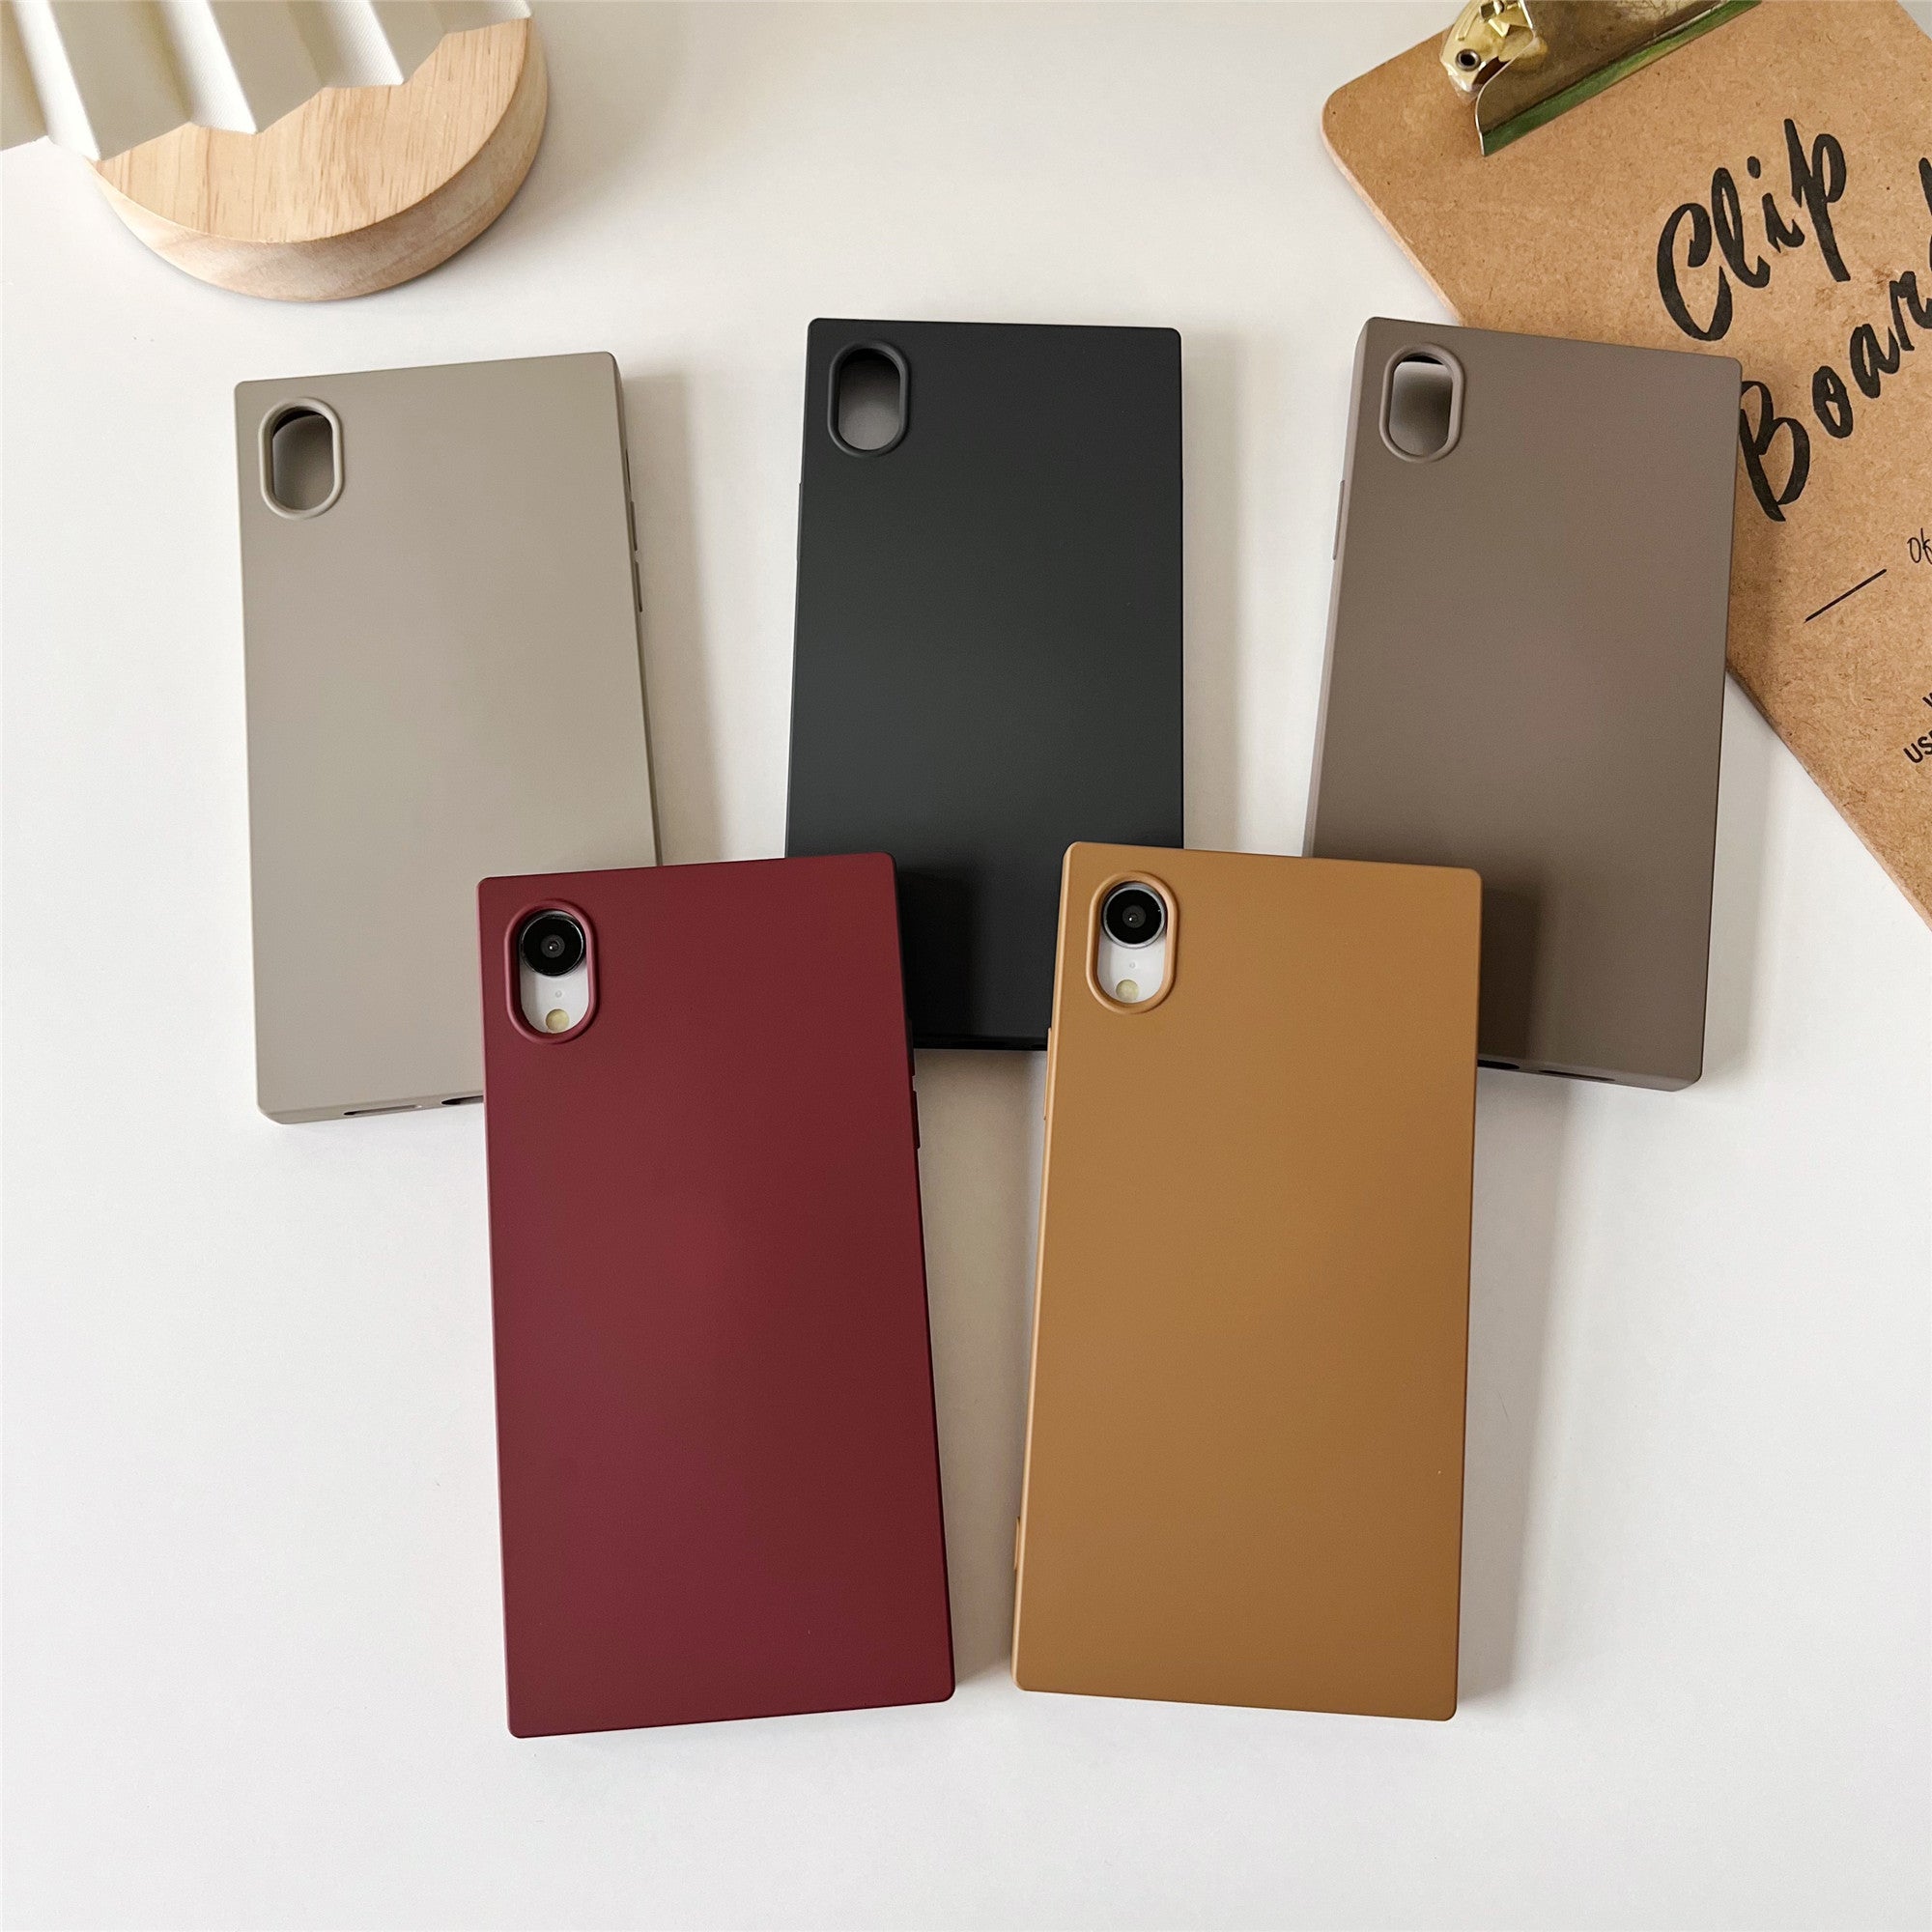 iPhone XR Case Square Silicone Neutral Color (Deep Rouge)